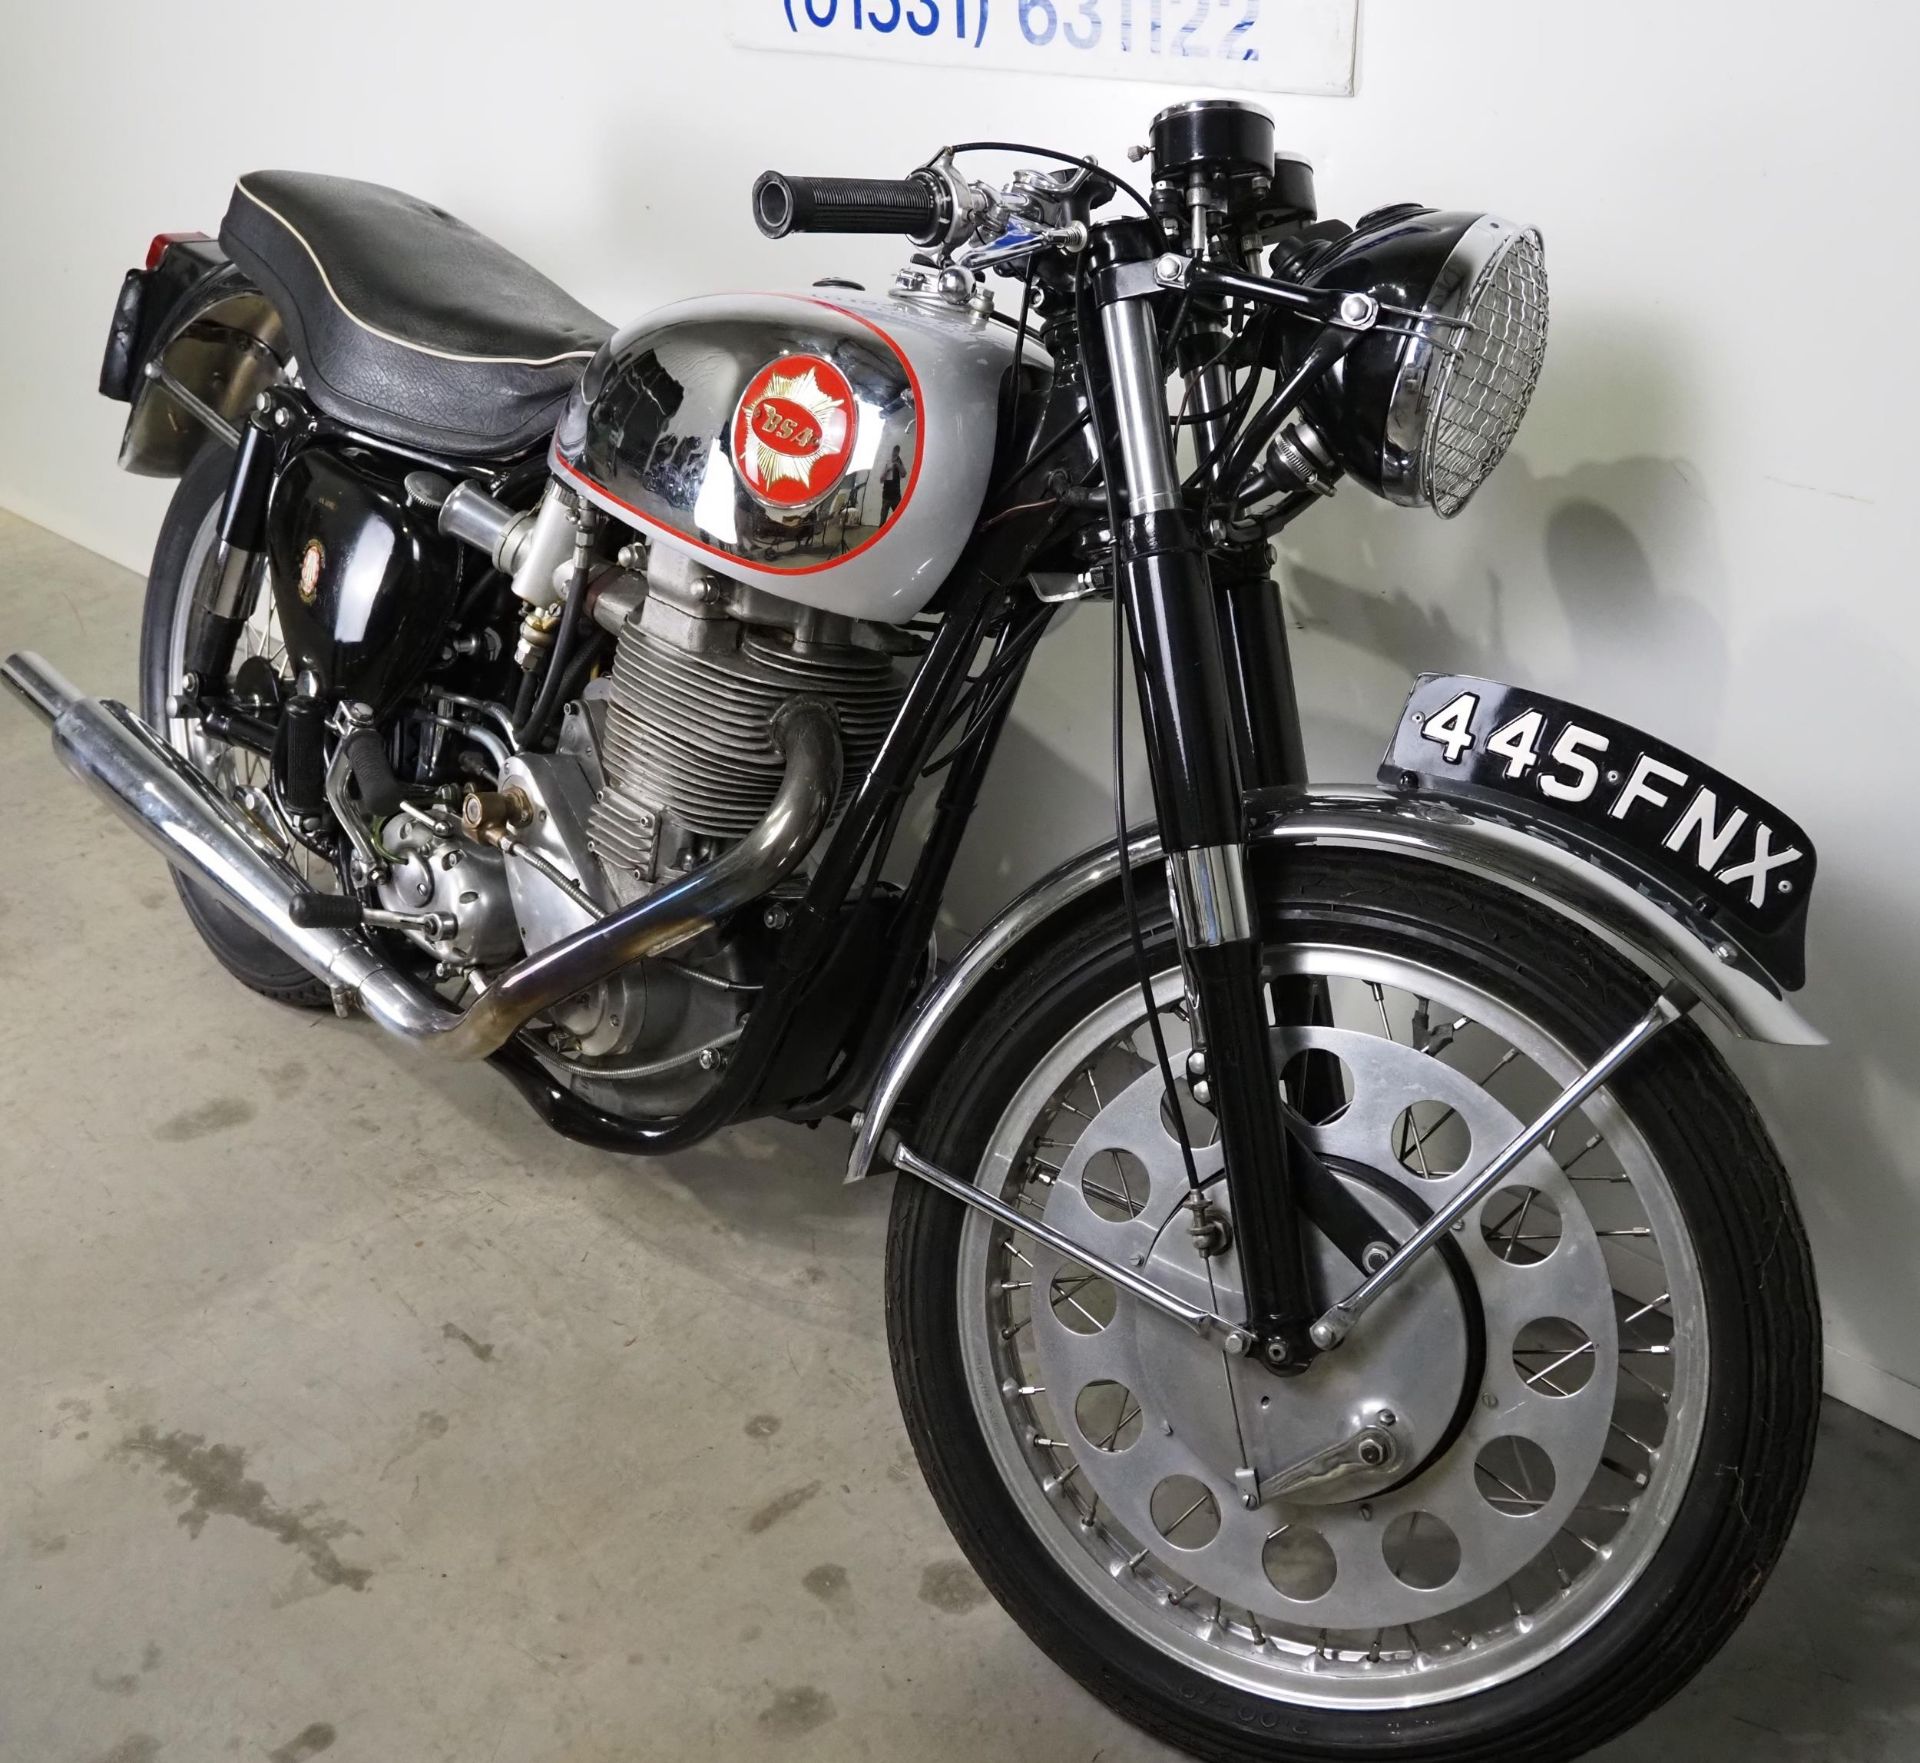 BSA Goldstar DBD34 Motorcycle. Believed to be 1961. 500cc. Frame no. CB32-11092 Engine no. - Image 4 of 10